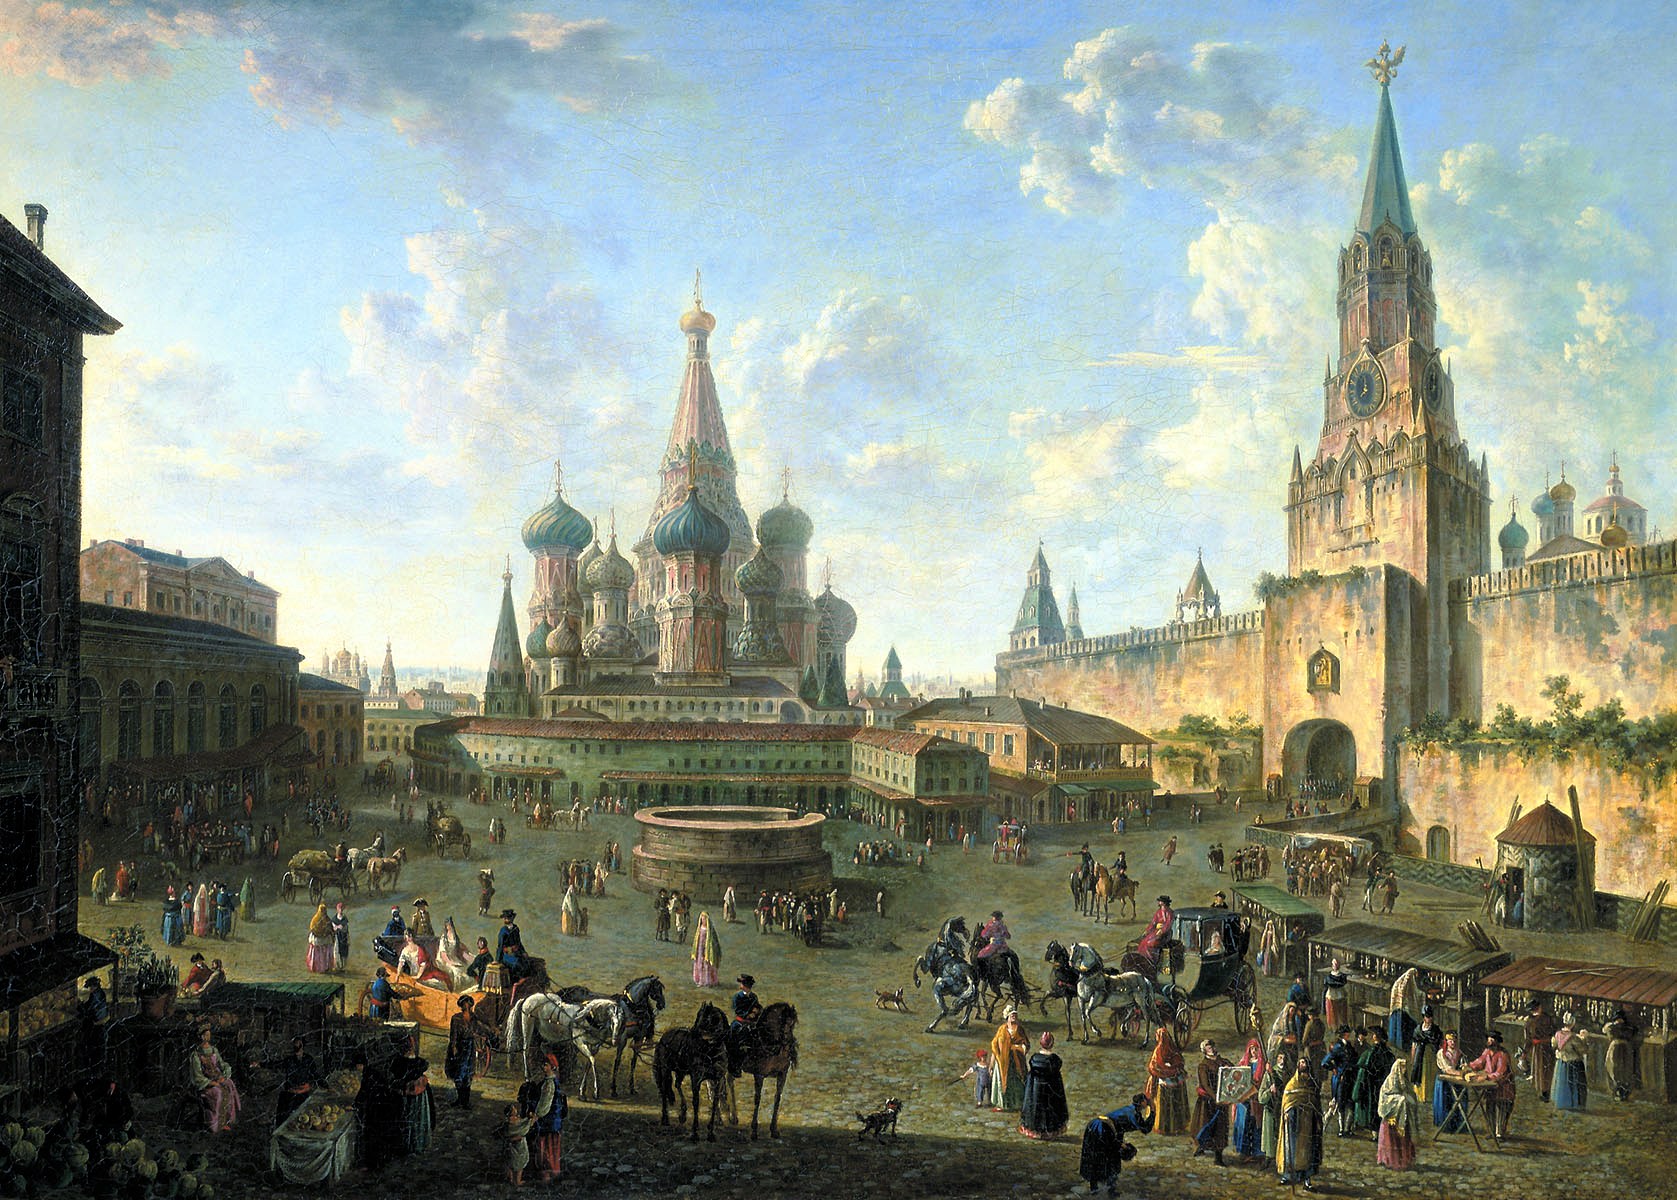 Red Square in Moscow 1801 by Fedor Alekseev